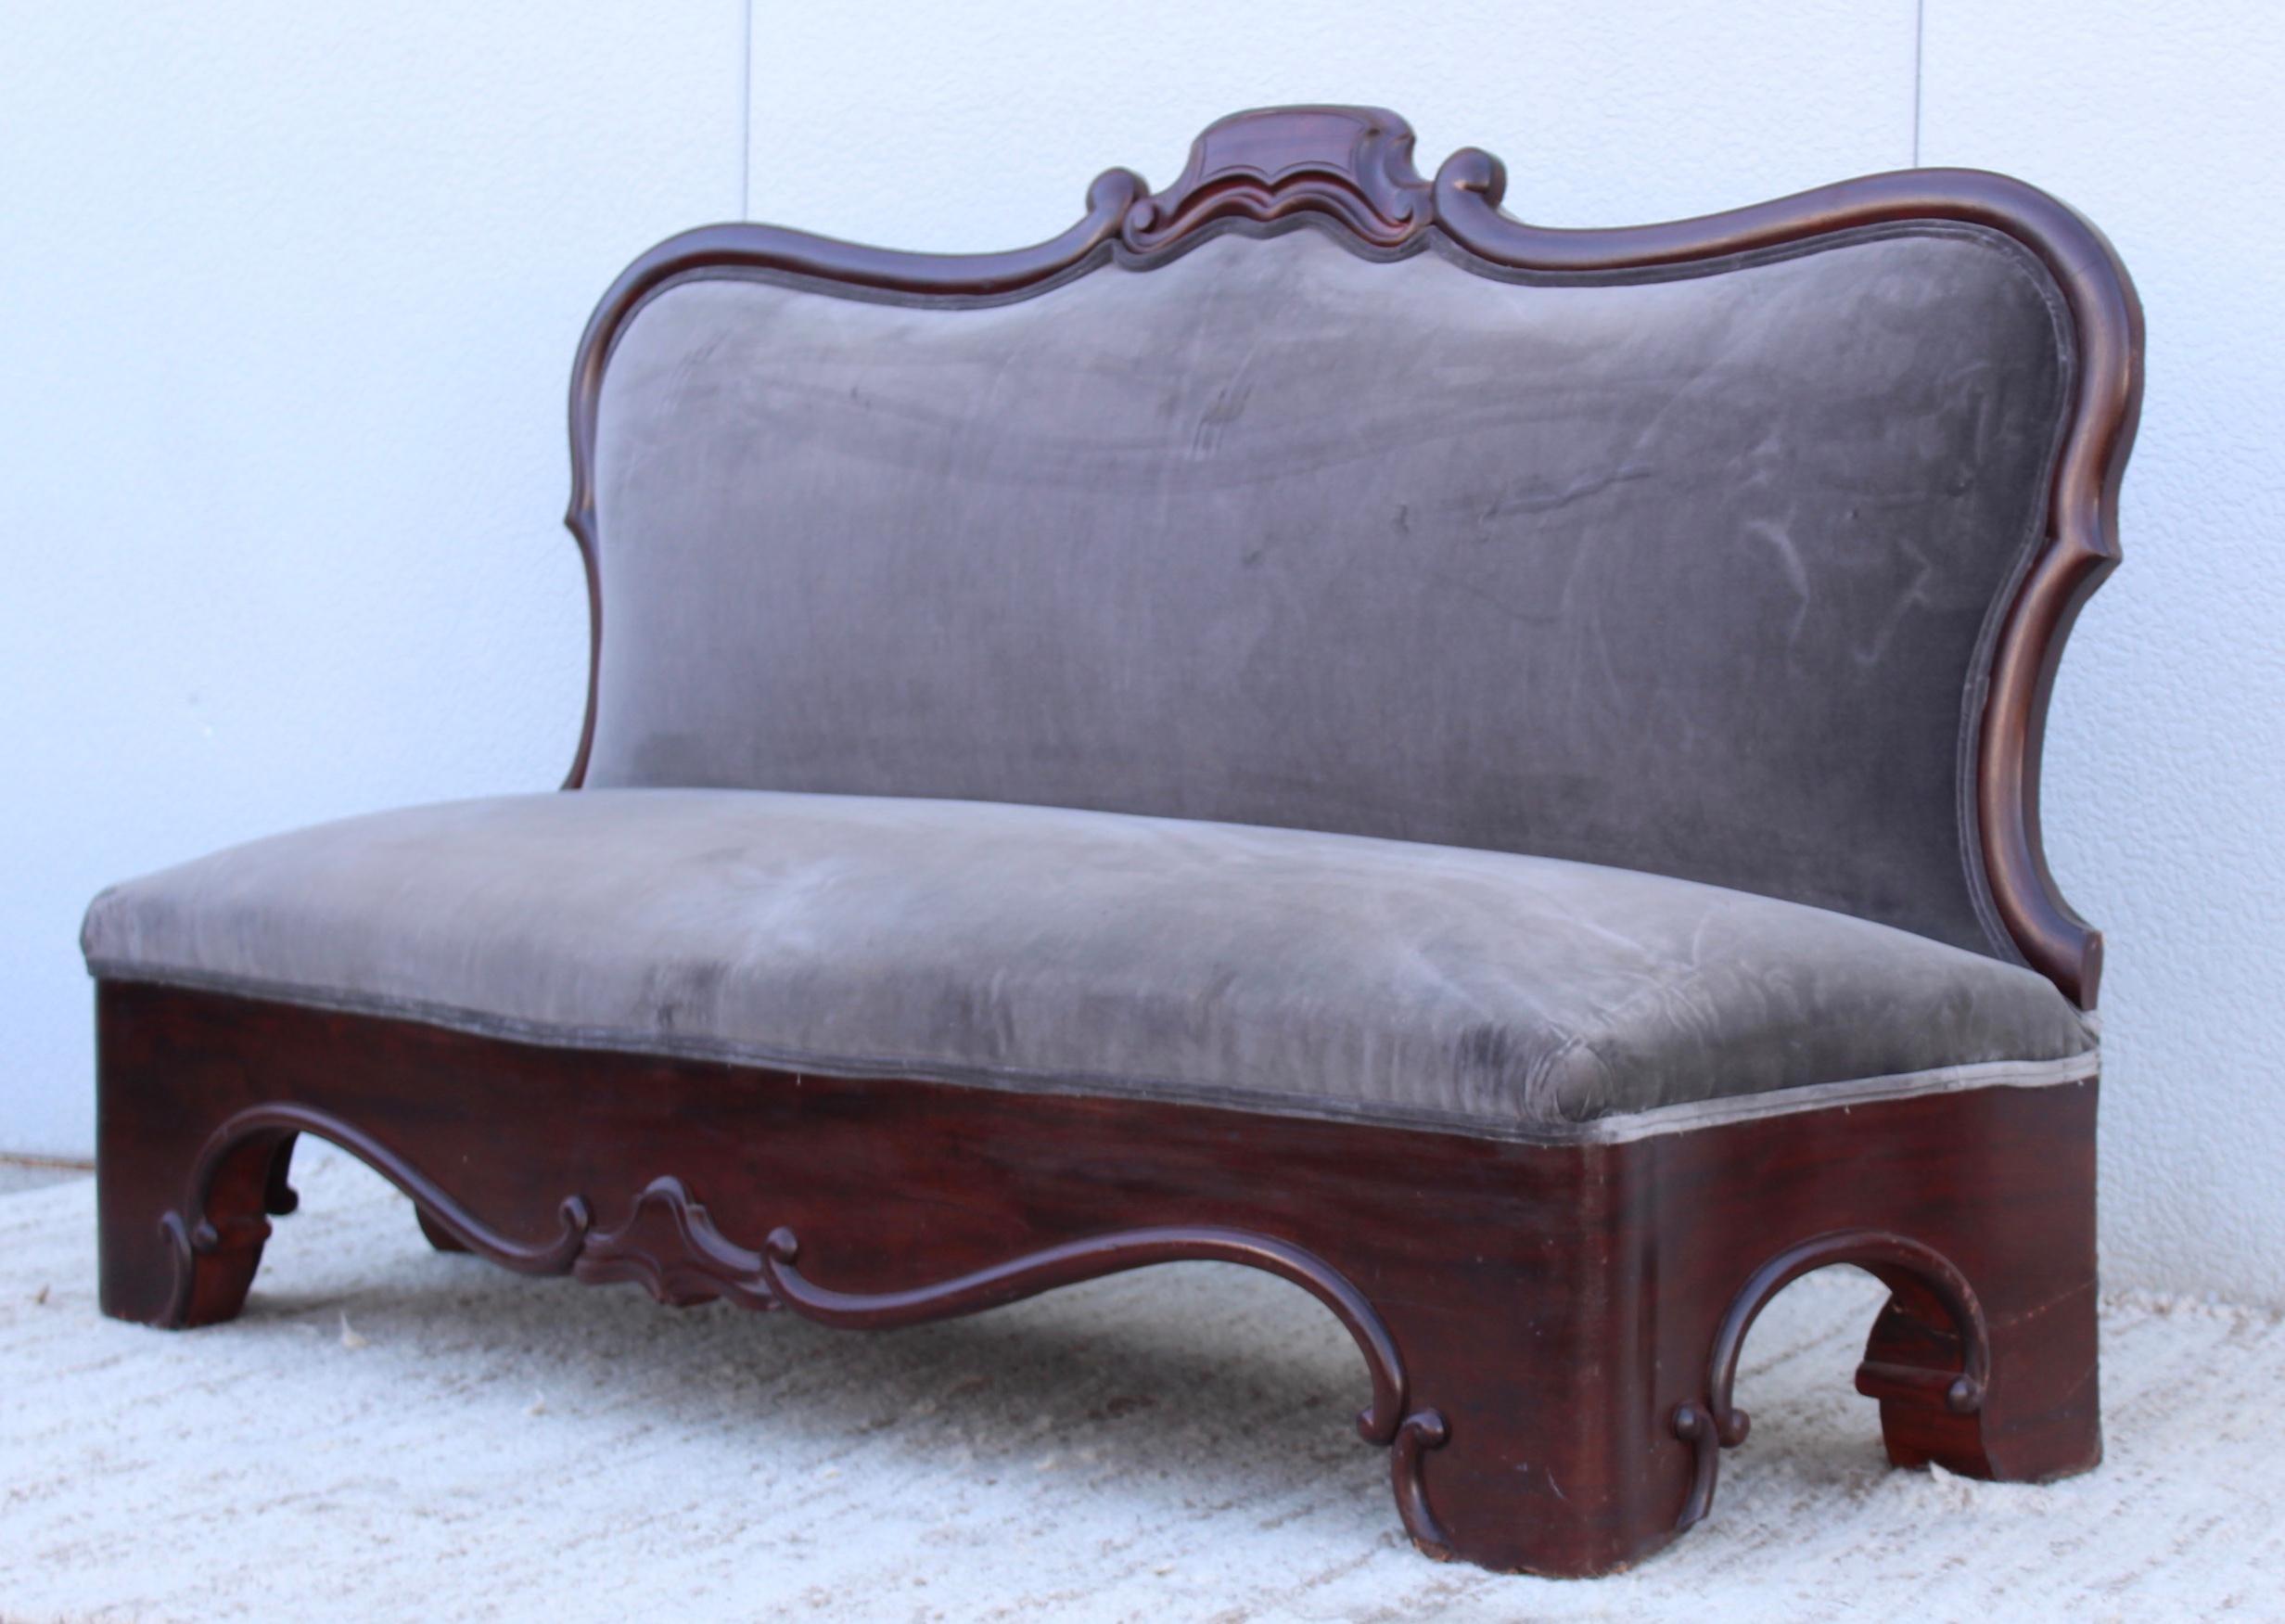 Antique Victorian armless loveseat in velvet, in vintage original condition with some wear and patina, it needs refinishing and new upholstery.